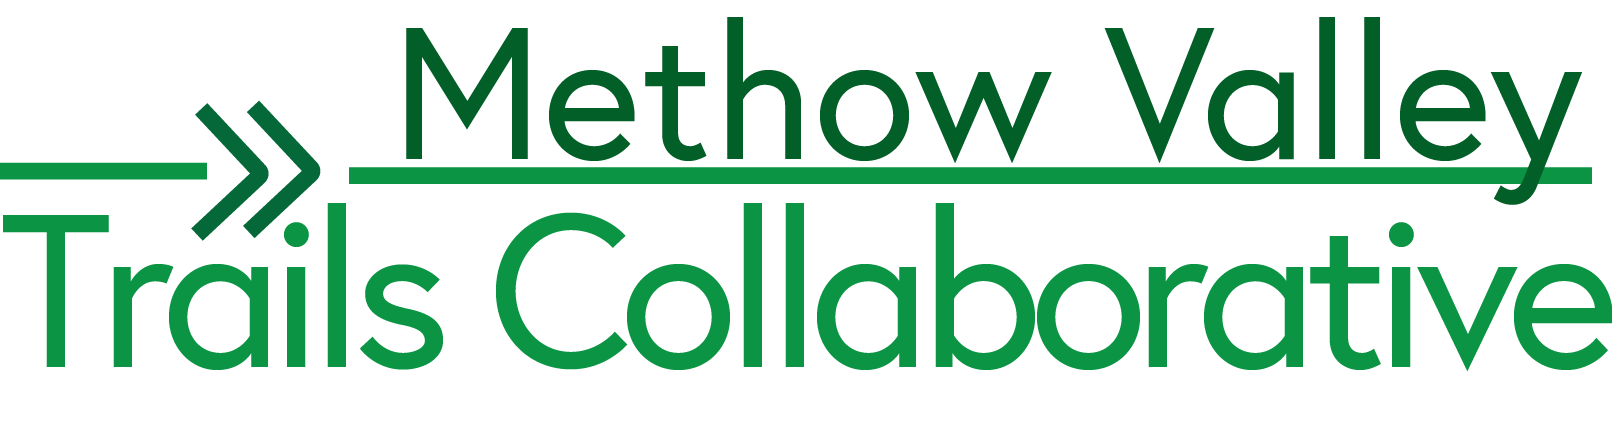 Methow Valley Trails Collaborative